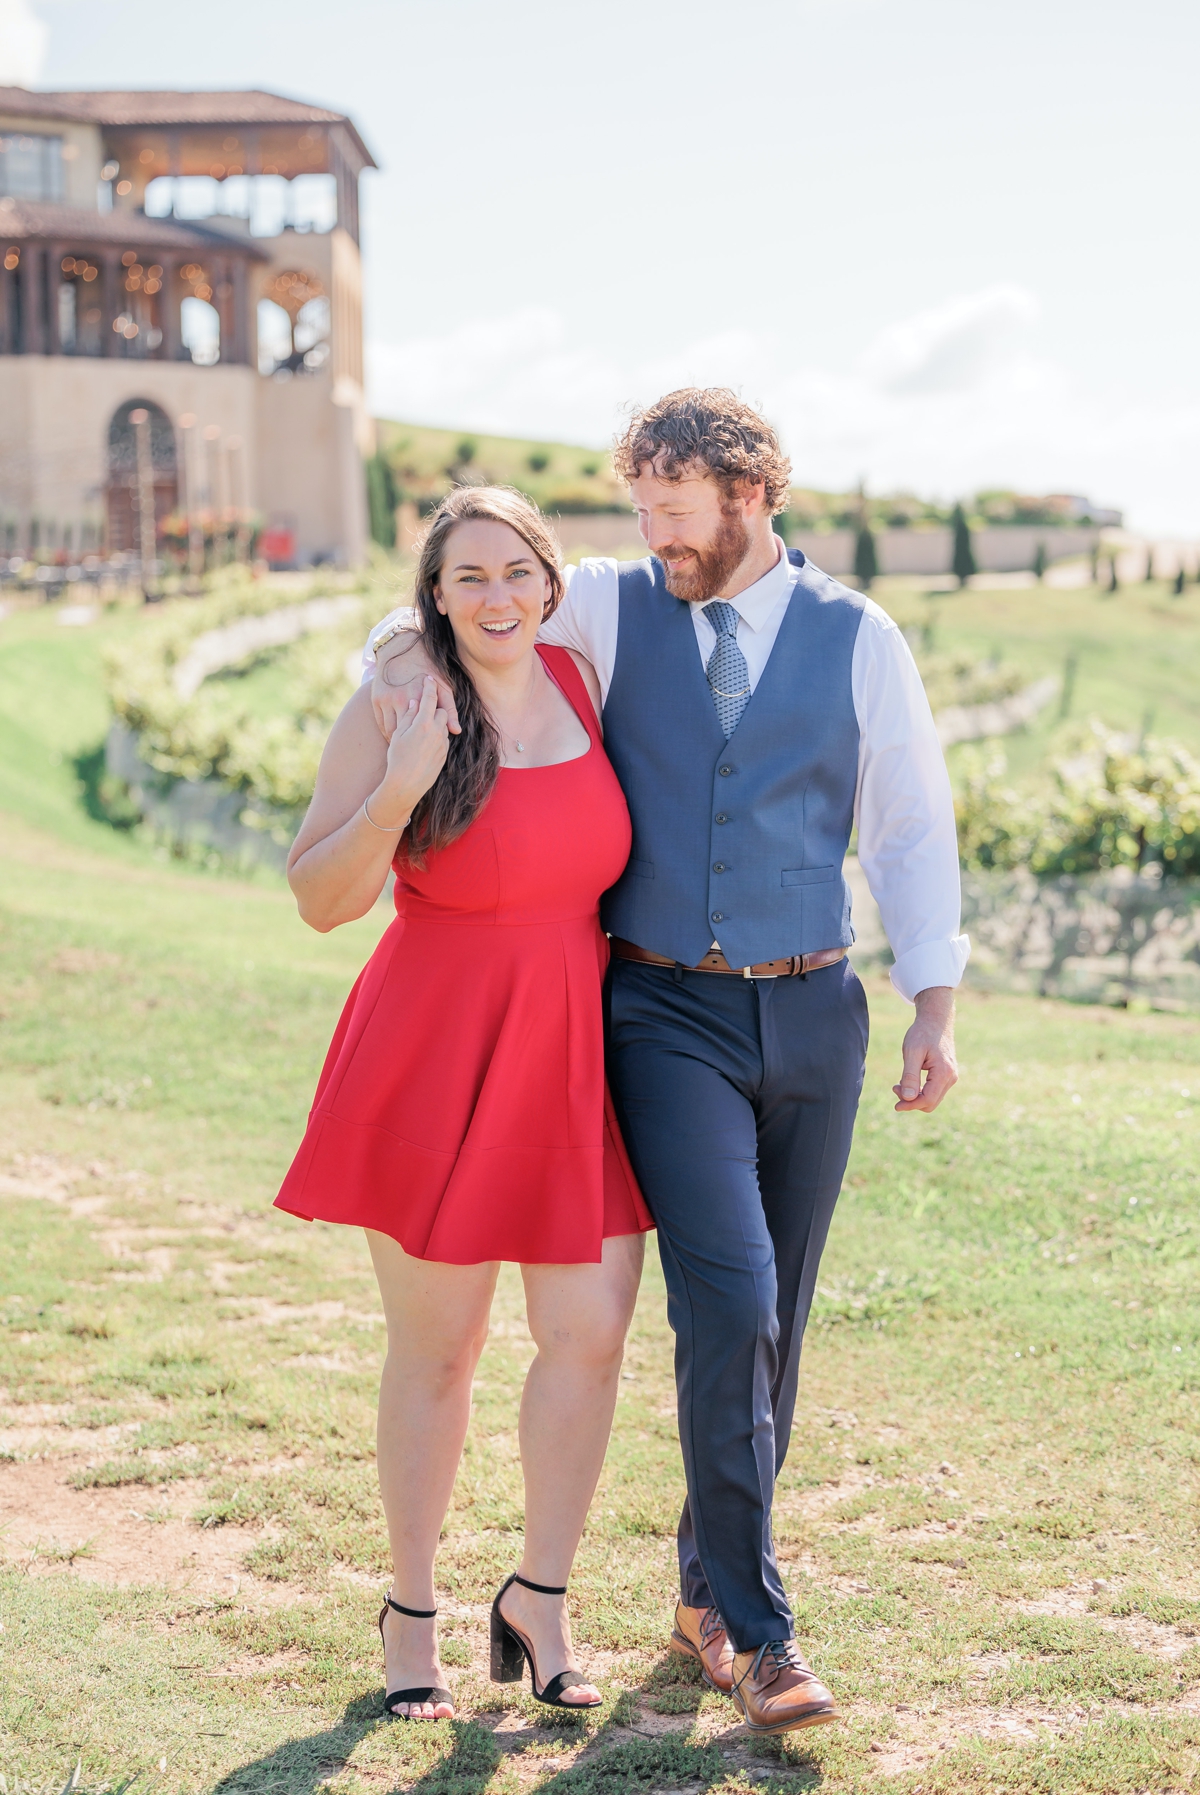 Matthew and Rachel walking with his arm over her shoulder during their session at Montaluce Winery.